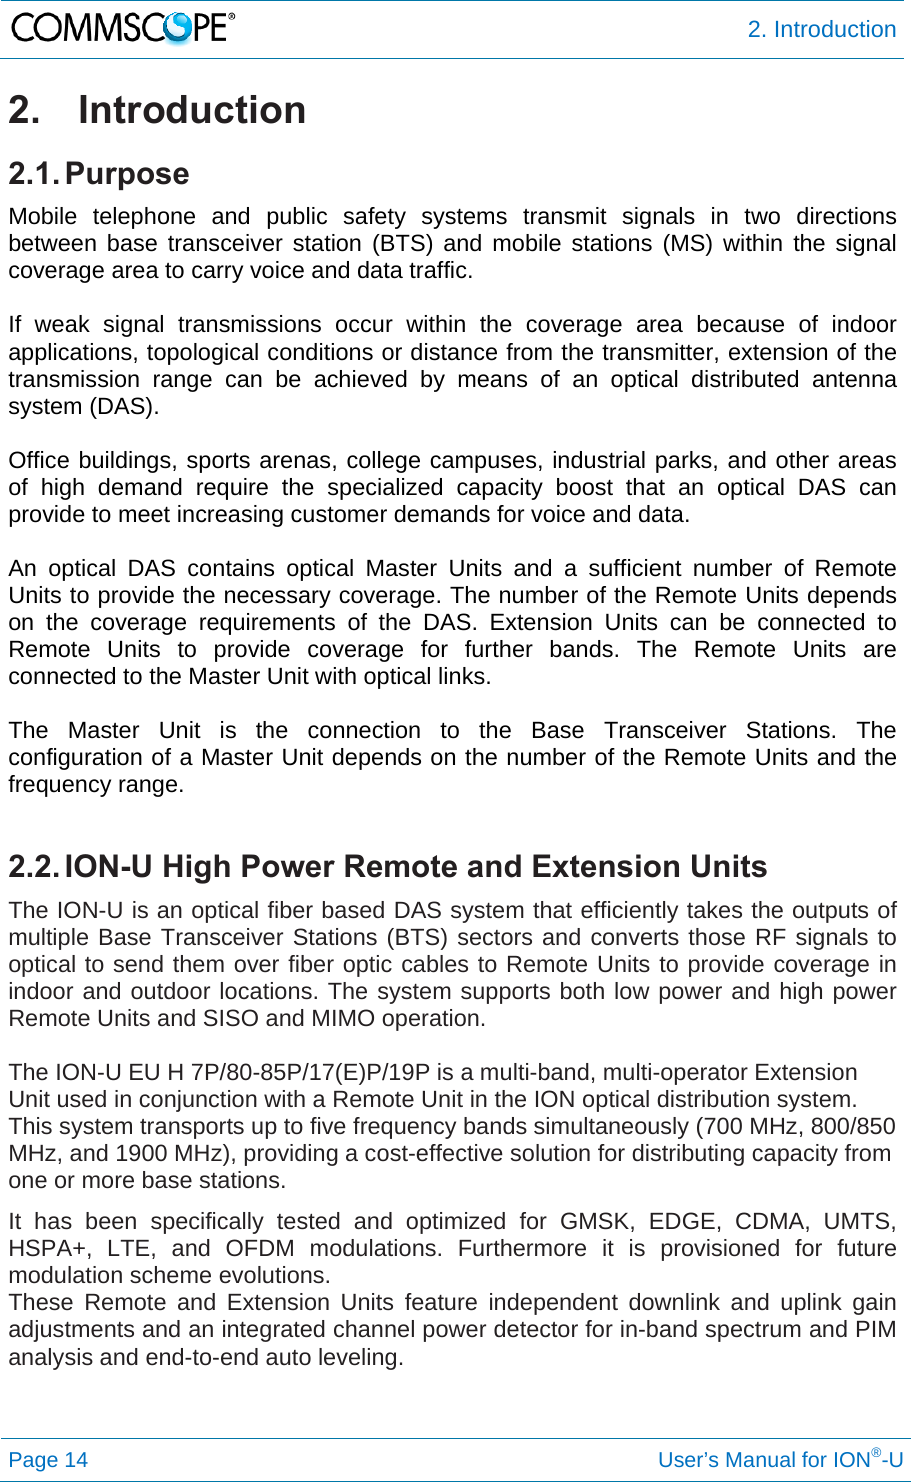  2. Introduction Page 14     User’s Manual for ION®-U 2. Introduction 2.1. Purpose Mobile telephone and public safety systems transmit signals in two directions between base transceiver station (BTS) and mobile stations (MS) within the signal coverage area to carry voice and data traffic.  If weak signal transmissions occur within the coverage area because of indoor applications, topological conditions or distance from the transmitter, extension of the transmission range can be achieved by means of an optical distributed antenna system (DAS).  Office buildings, sports arenas, college campuses, industrial parks, and other areas of high demand require the specialized capacity boost that an optical DAS can provide to meet increasing customer demands for voice and data.  An optical DAS contains optical Master Units and a sufficient number of Remote Units to provide the necessary coverage. The number of the Remote Units depends on the coverage requirements of the DAS. Extension Units can be connected to Remote Units to provide coverage for further bands. The Remote Units are connected to the Master Unit with optical links.  The Master Unit is the connection to the Base Transceiver Stations. The configuration of a Master Unit depends on the number of the Remote Units and the frequency range.   2.2. ION-U High Power Remote and Extension Units The ION-U is an optical fiber based DAS system that efficiently takes the outputs of multiple Base Transceiver Stations (BTS) sectors and converts those RF signals to optical to send them over fiber optic cables to Remote Units to provide coverage in indoor and outdoor locations. The system supports both low power and high power Remote Units and SISO and MIMO operation.  The ION-U EU H 7P/80-85P/17(E)P/19P is a multi-band, multi-operator Extension Unit used in conjunction with a Remote Unit in the ION optical distribution system. This system transports up to five frequency bands simultaneously (700 MHz, 800/850 MHz, and 1900 MHz), providing a cost-effective solution for distributing capacity from one or more base stations. It has been specifically tested and optimized for GMSK, EDGE, CDMA, UMTS, HSPA+, LTE, and OFDM modulations. Furthermore it is provisioned for future modulation scheme evolutions. These Remote and Extension Units feature independent downlink and uplink gain adjustments and an integrated channel power detector for in-band spectrum and PIM analysis and end-to-end auto leveling.   